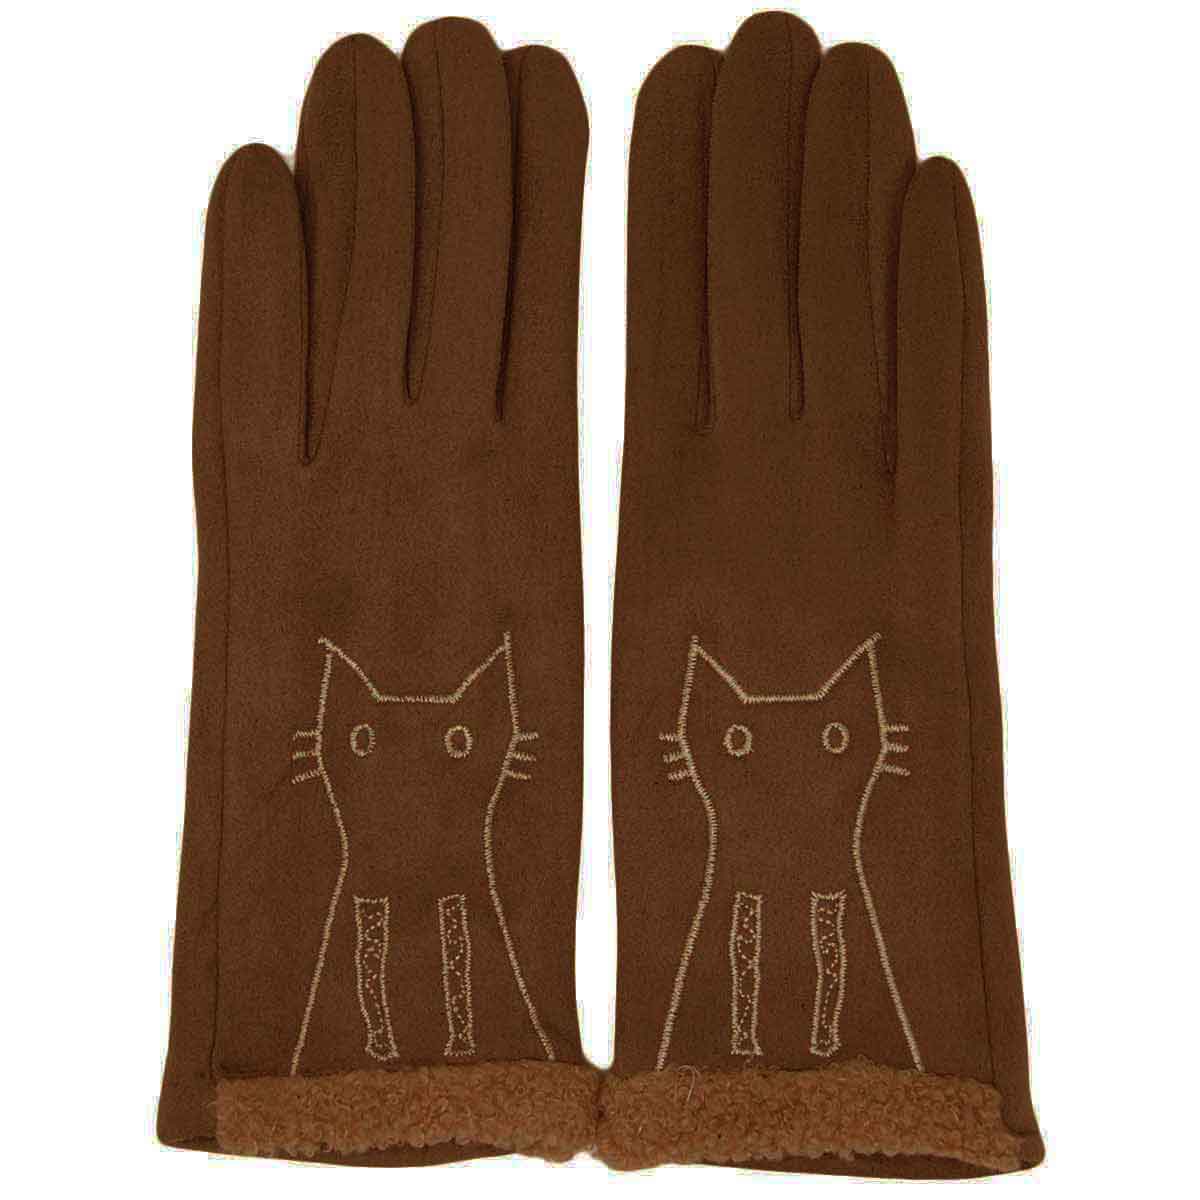 2390 - Touch Screen Smart Gloves 1224 - Camel Cat Silhouette<br>
Touch Screen Smart Gloves - One Size Fits Most